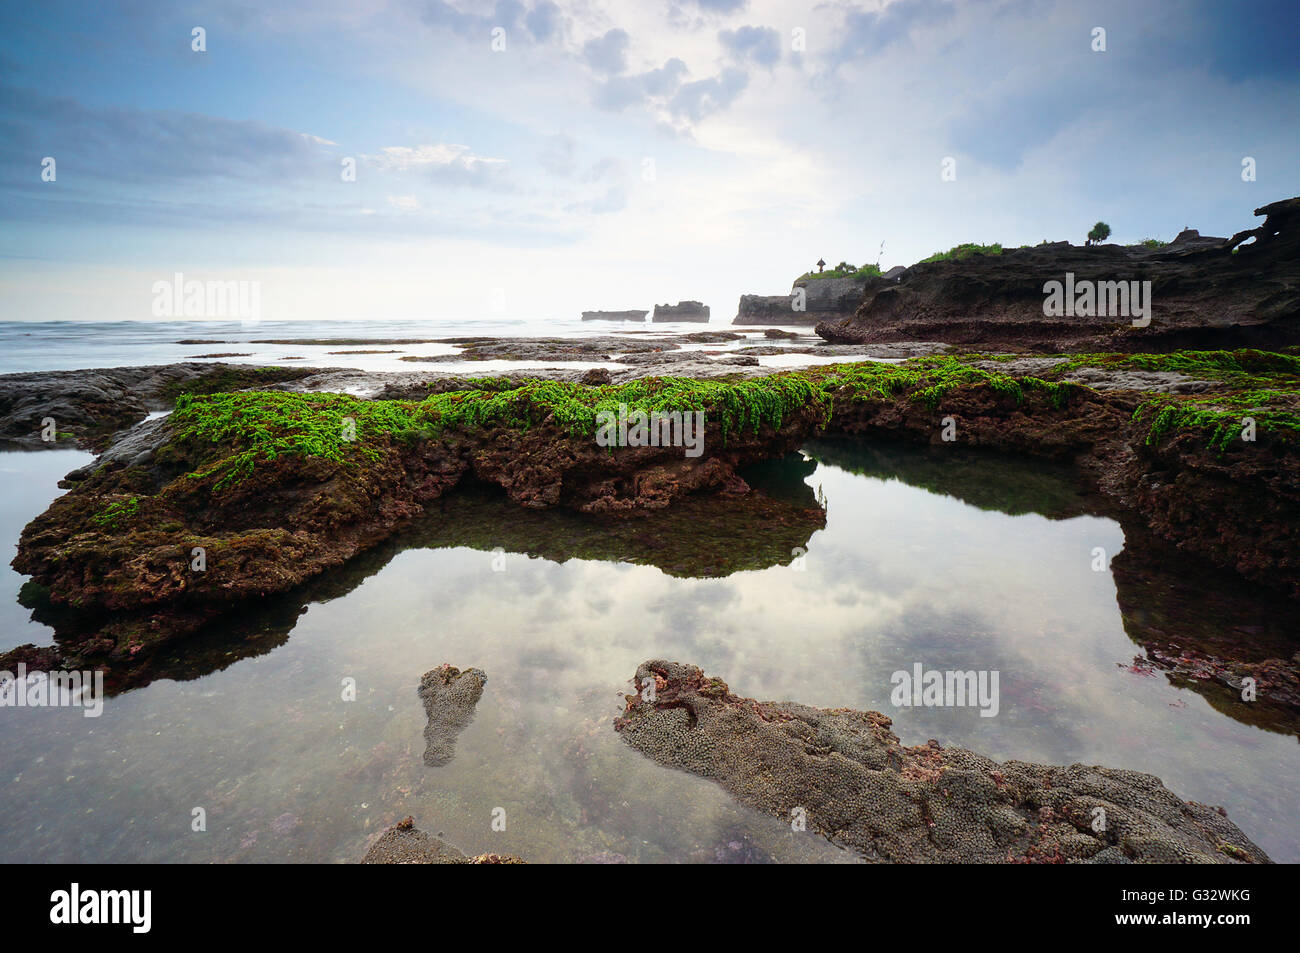 Moss covered rocks on Mengening beach at low tide, Bali, Indonesia Stock Photo